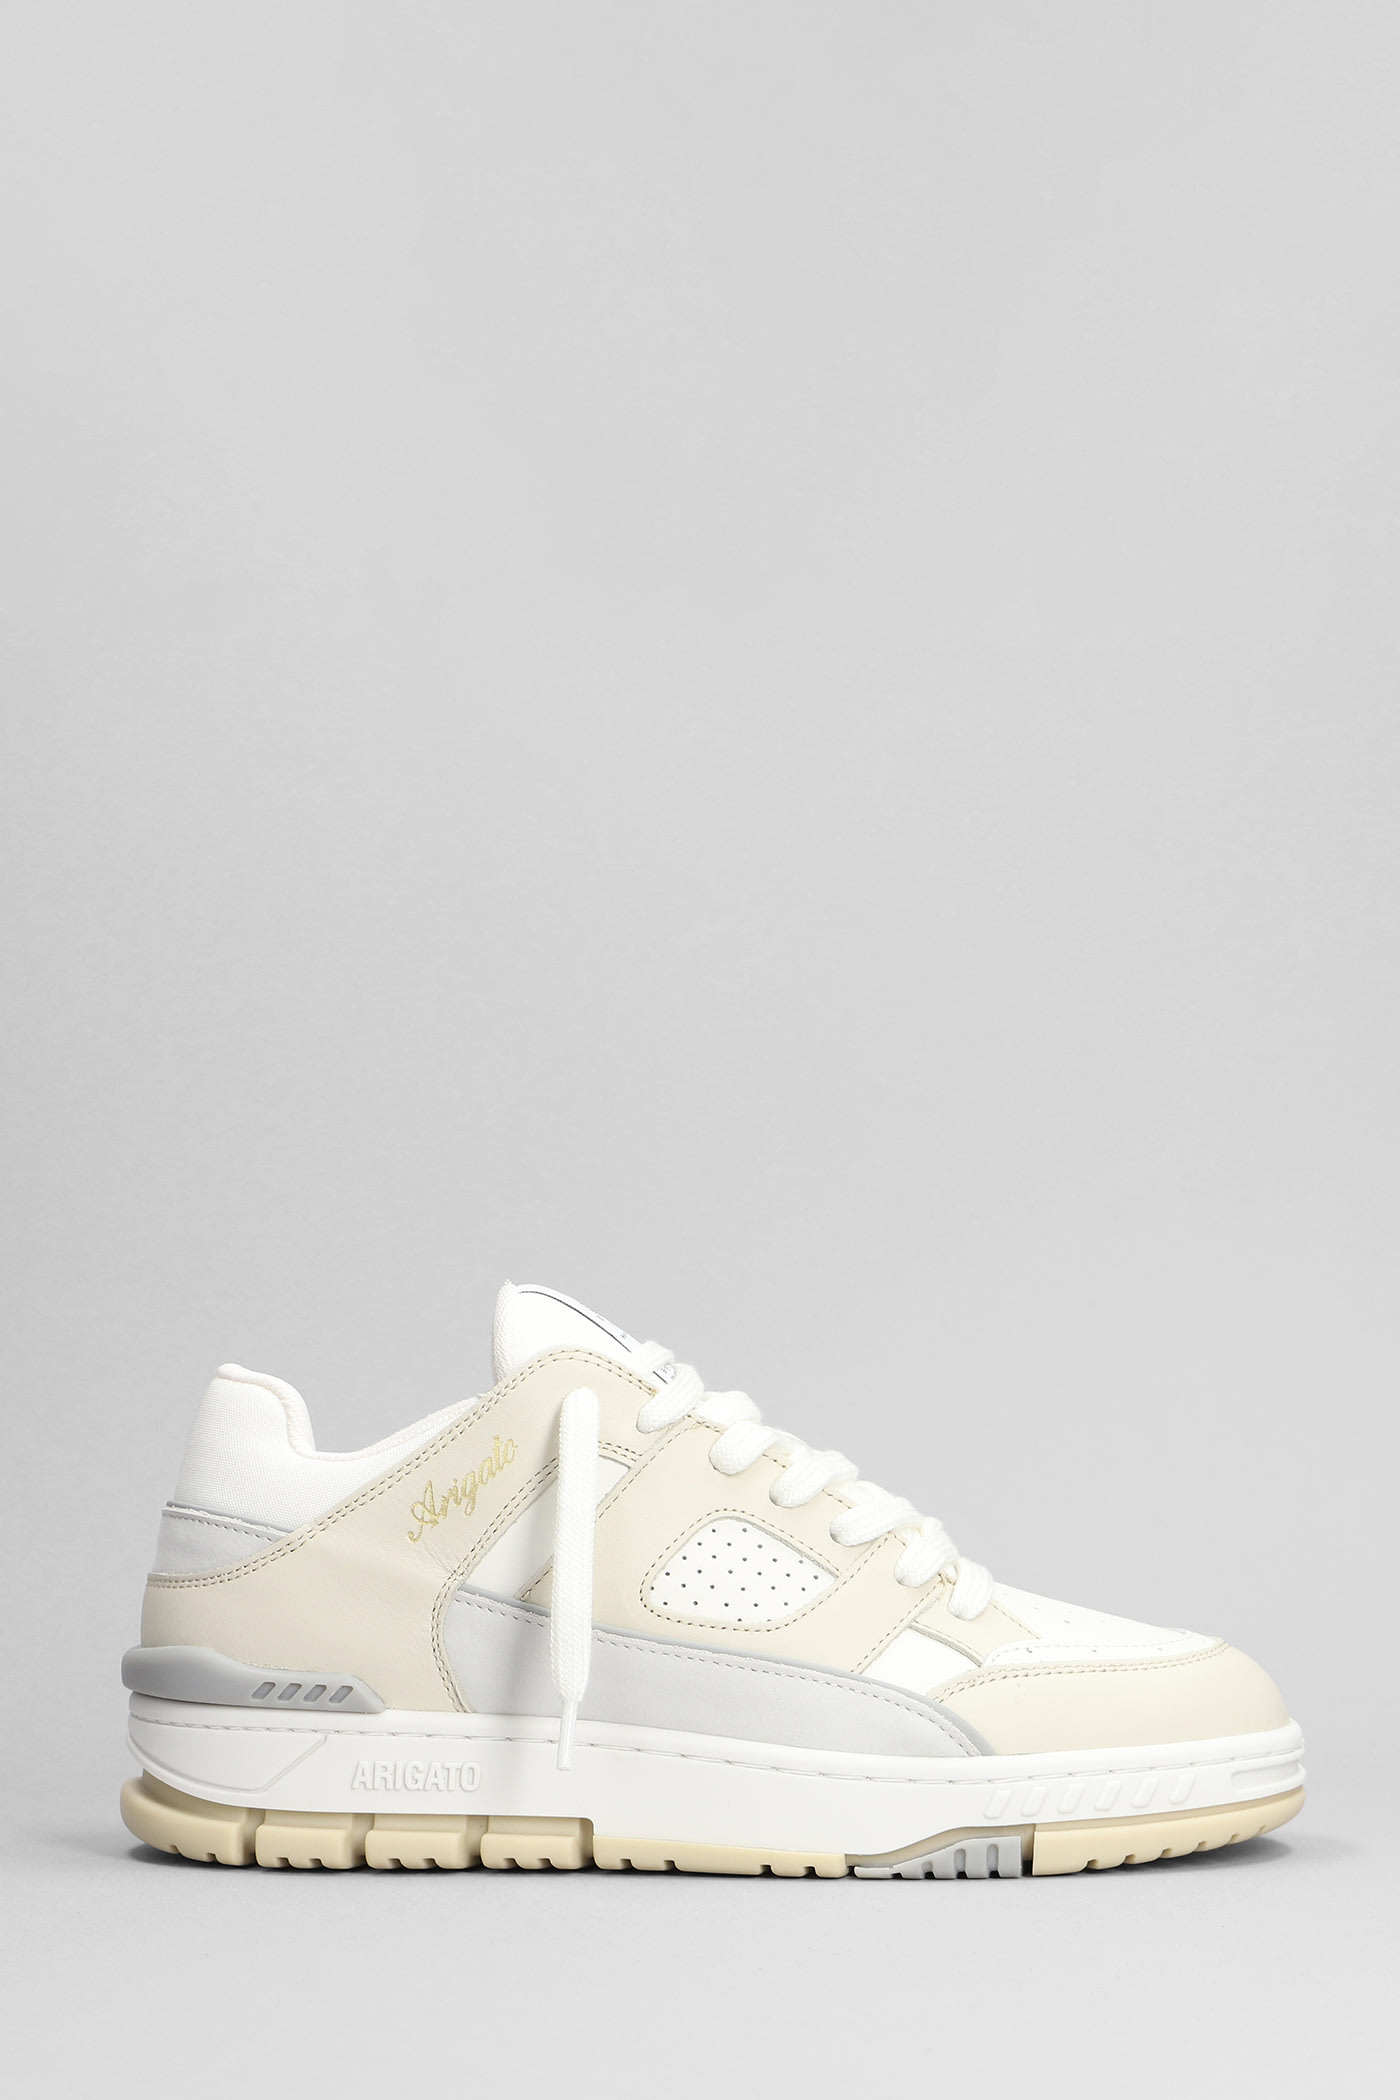 Axel Arigato Area Lo Sneakers In Beige Leather